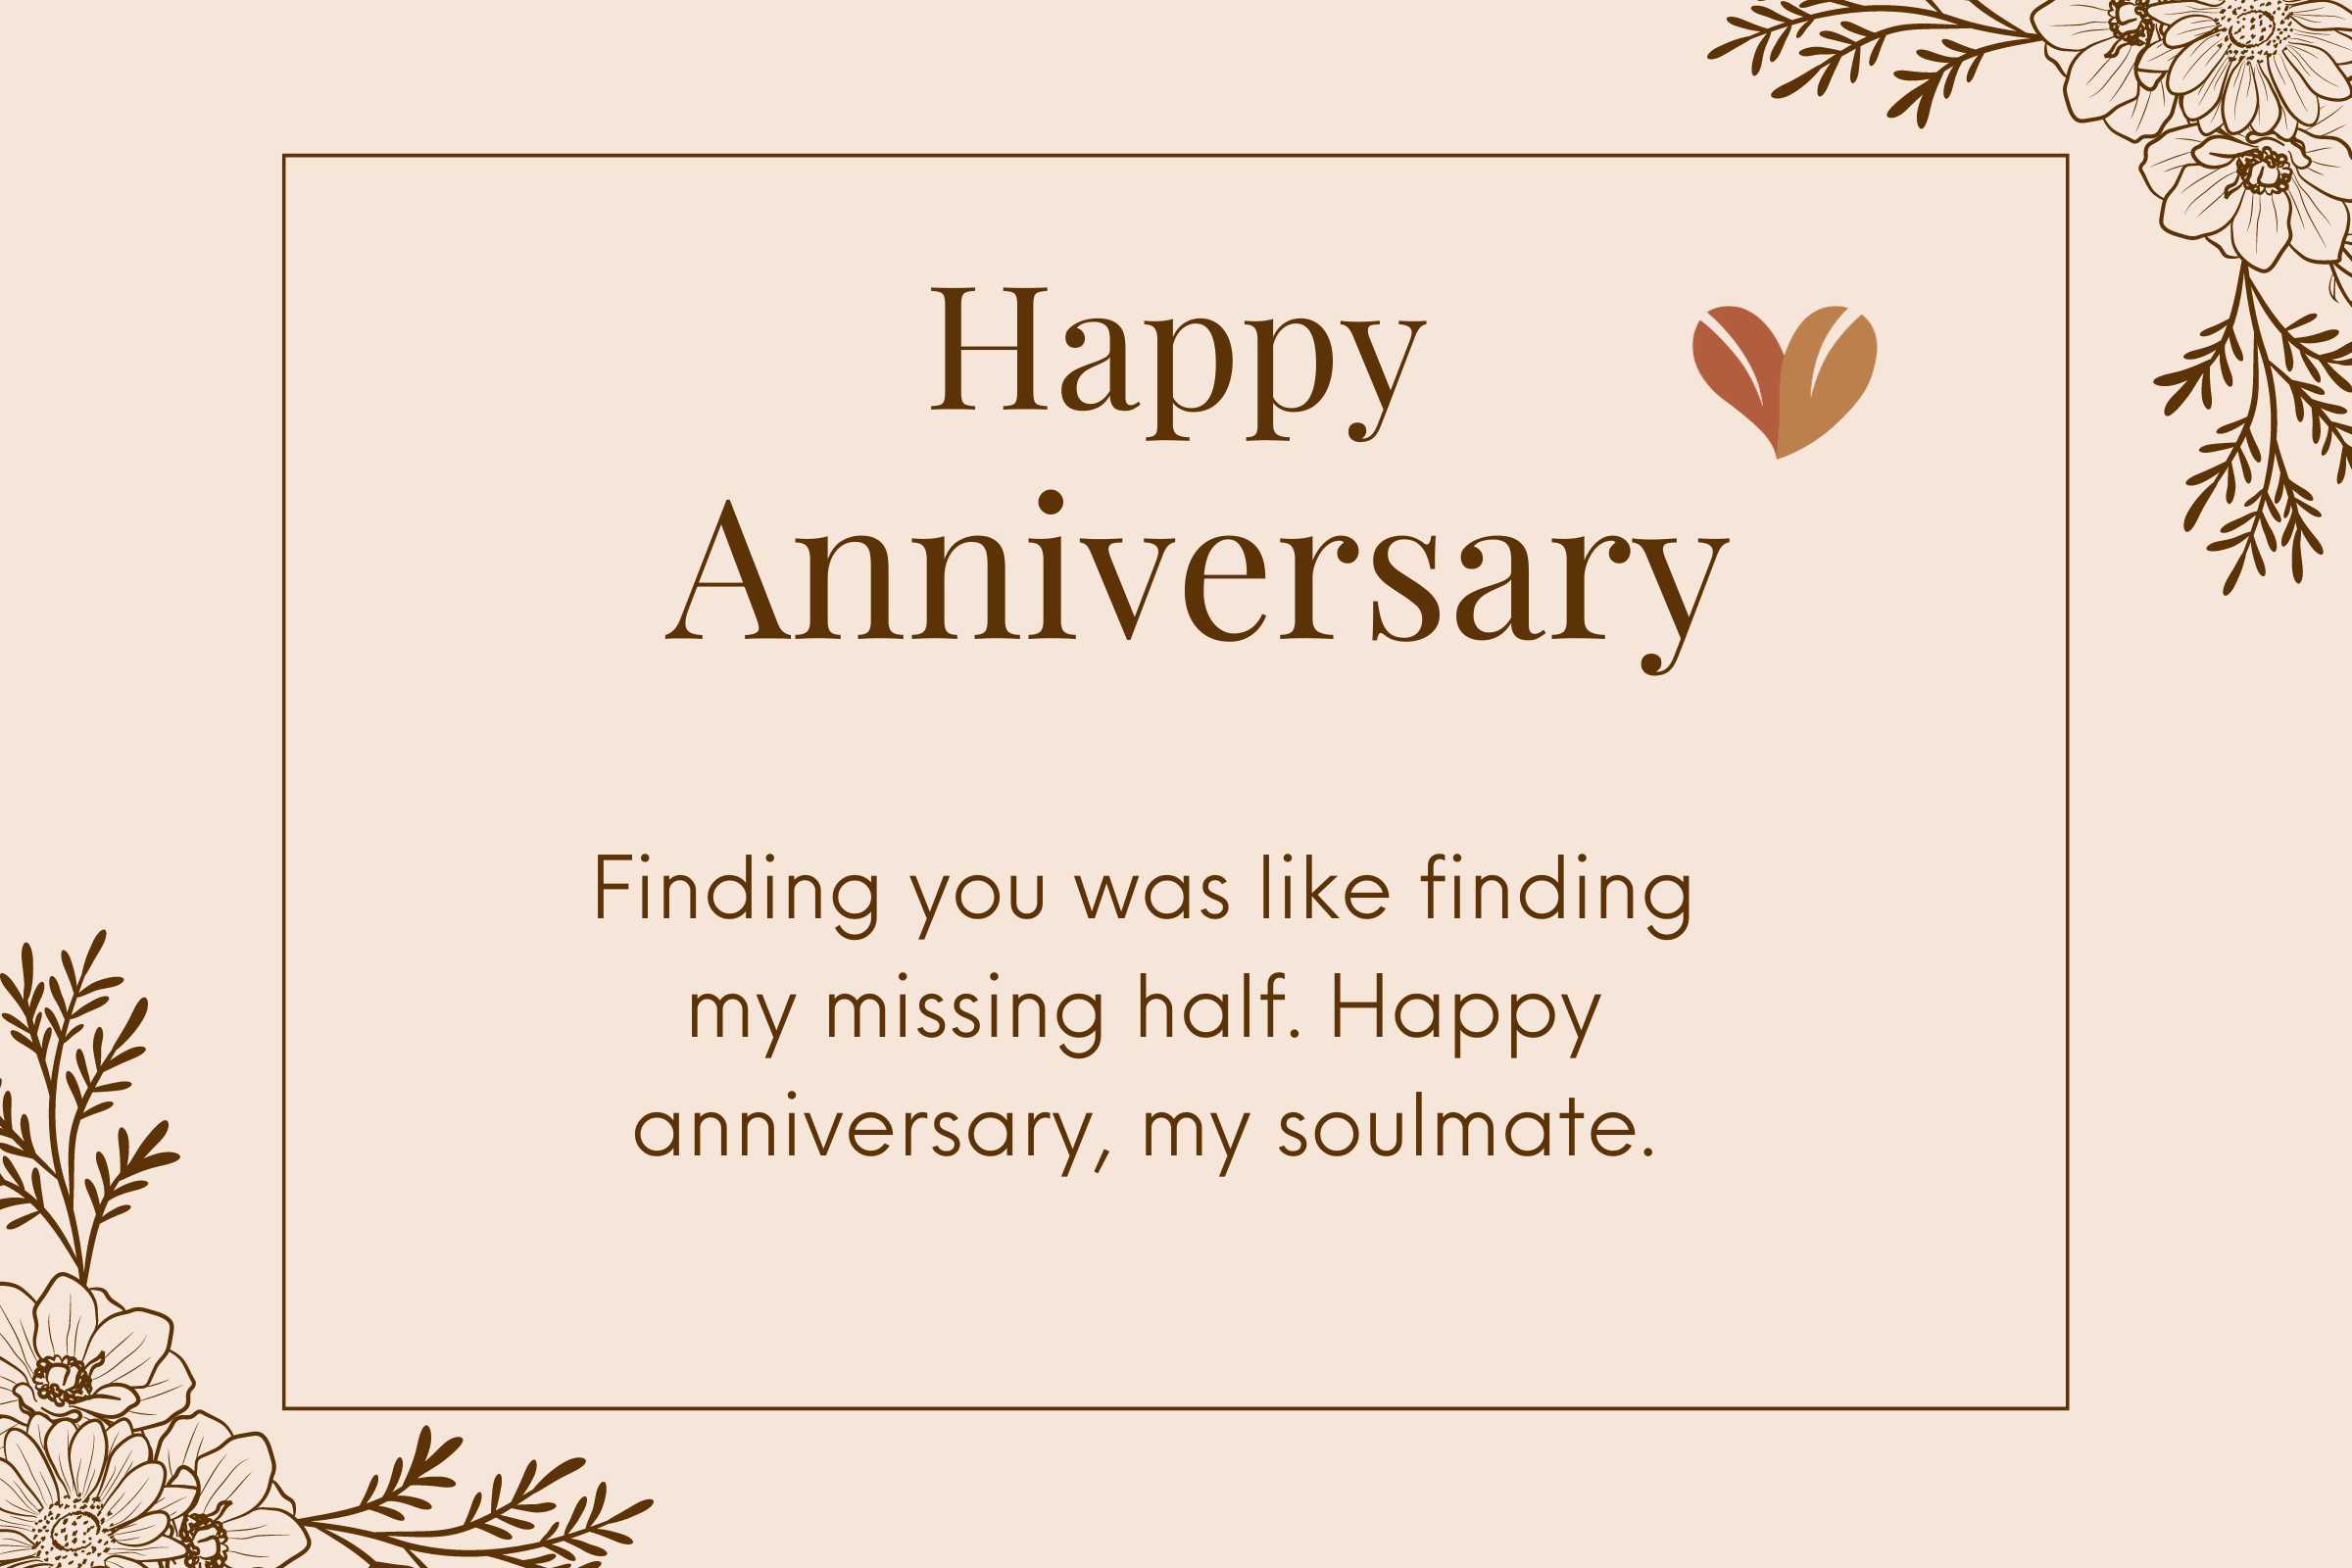 Our love story is unfolding, chapter by chapter - happy anniversary six-months